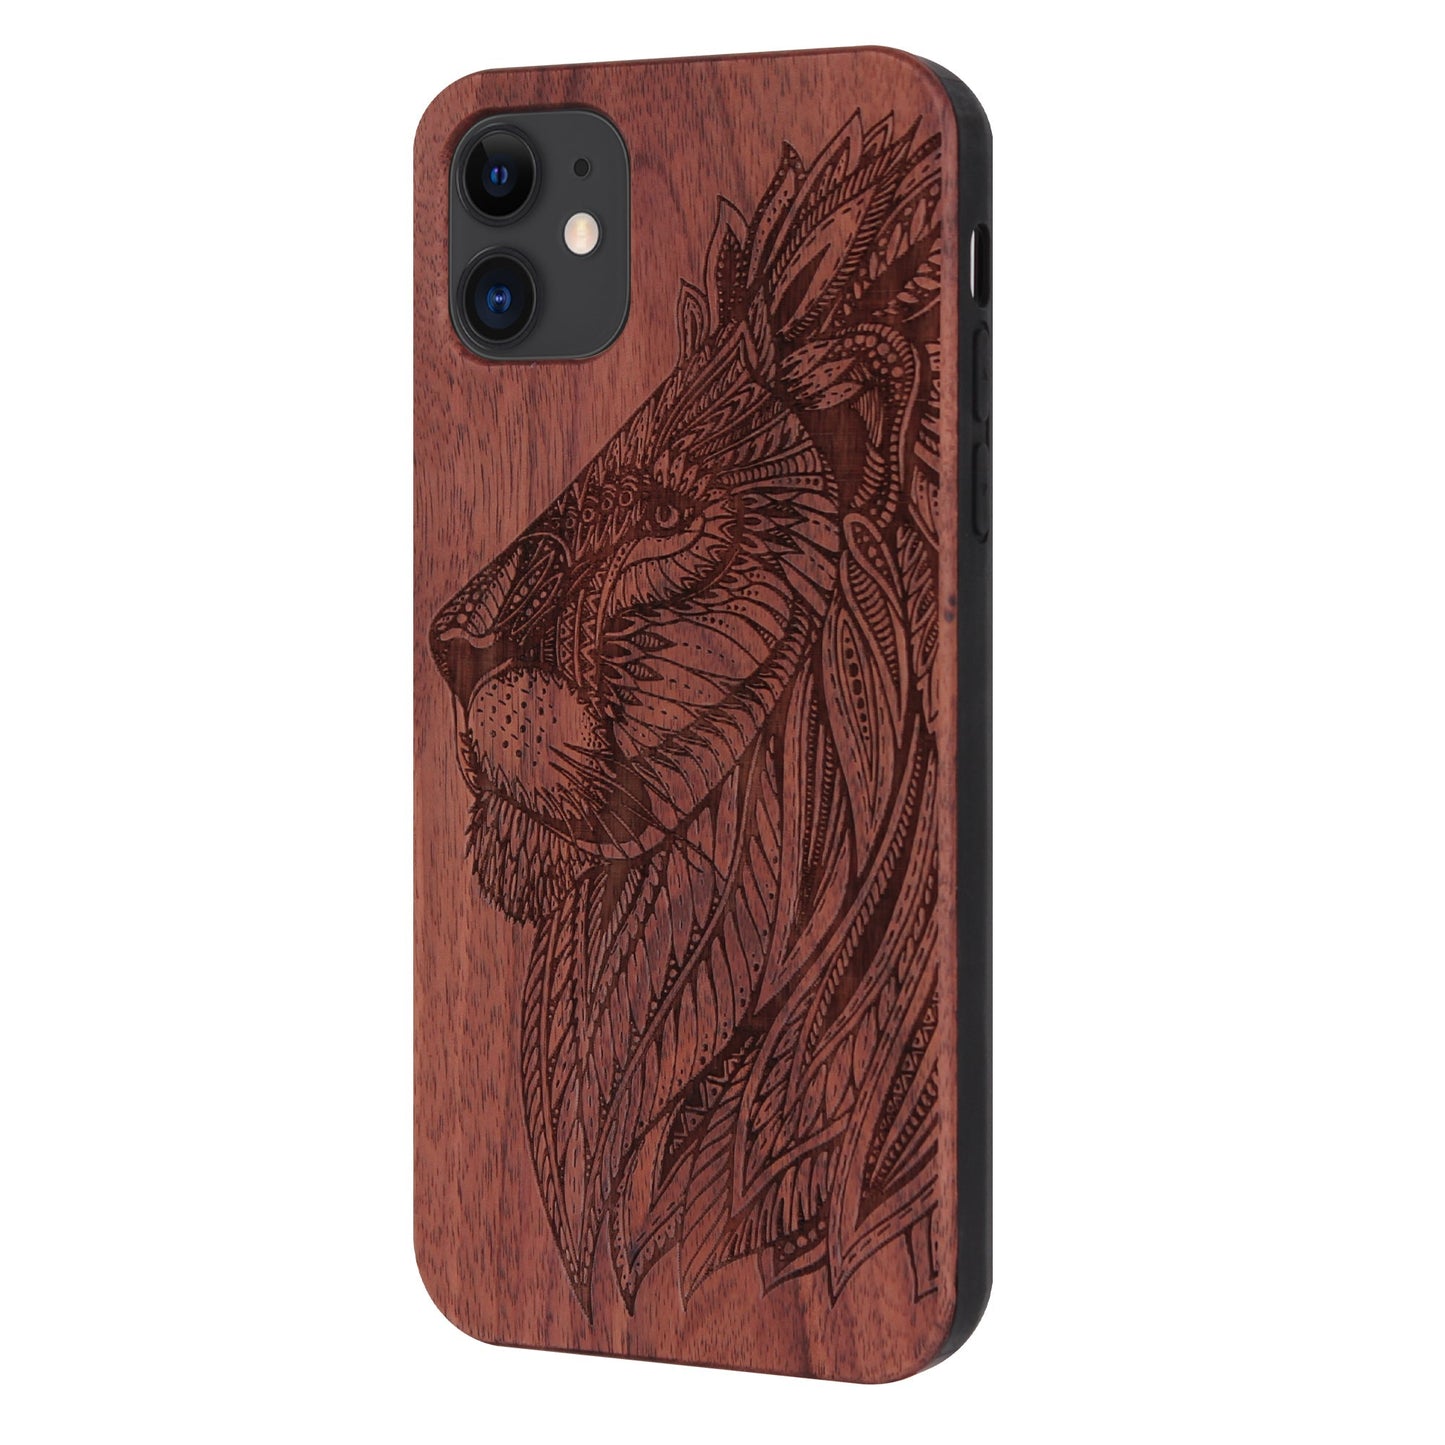 Rosewood Lion Eden Case for iPhone 11 